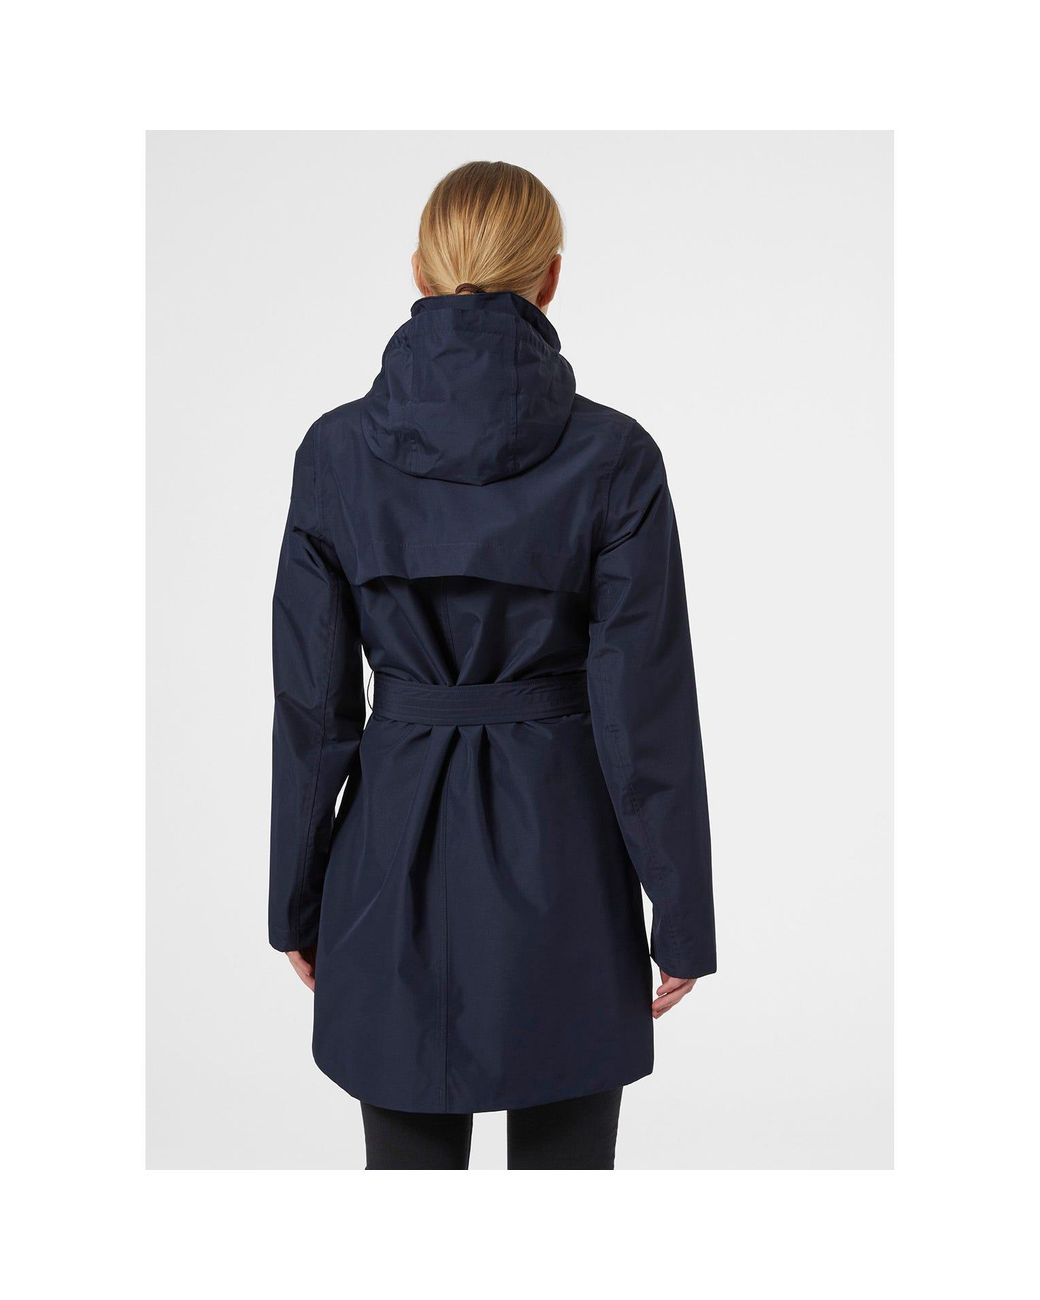 Helly Hansen Welsey Ii Trench Coat L in Navy (Blue) - Save 40% - Lyst